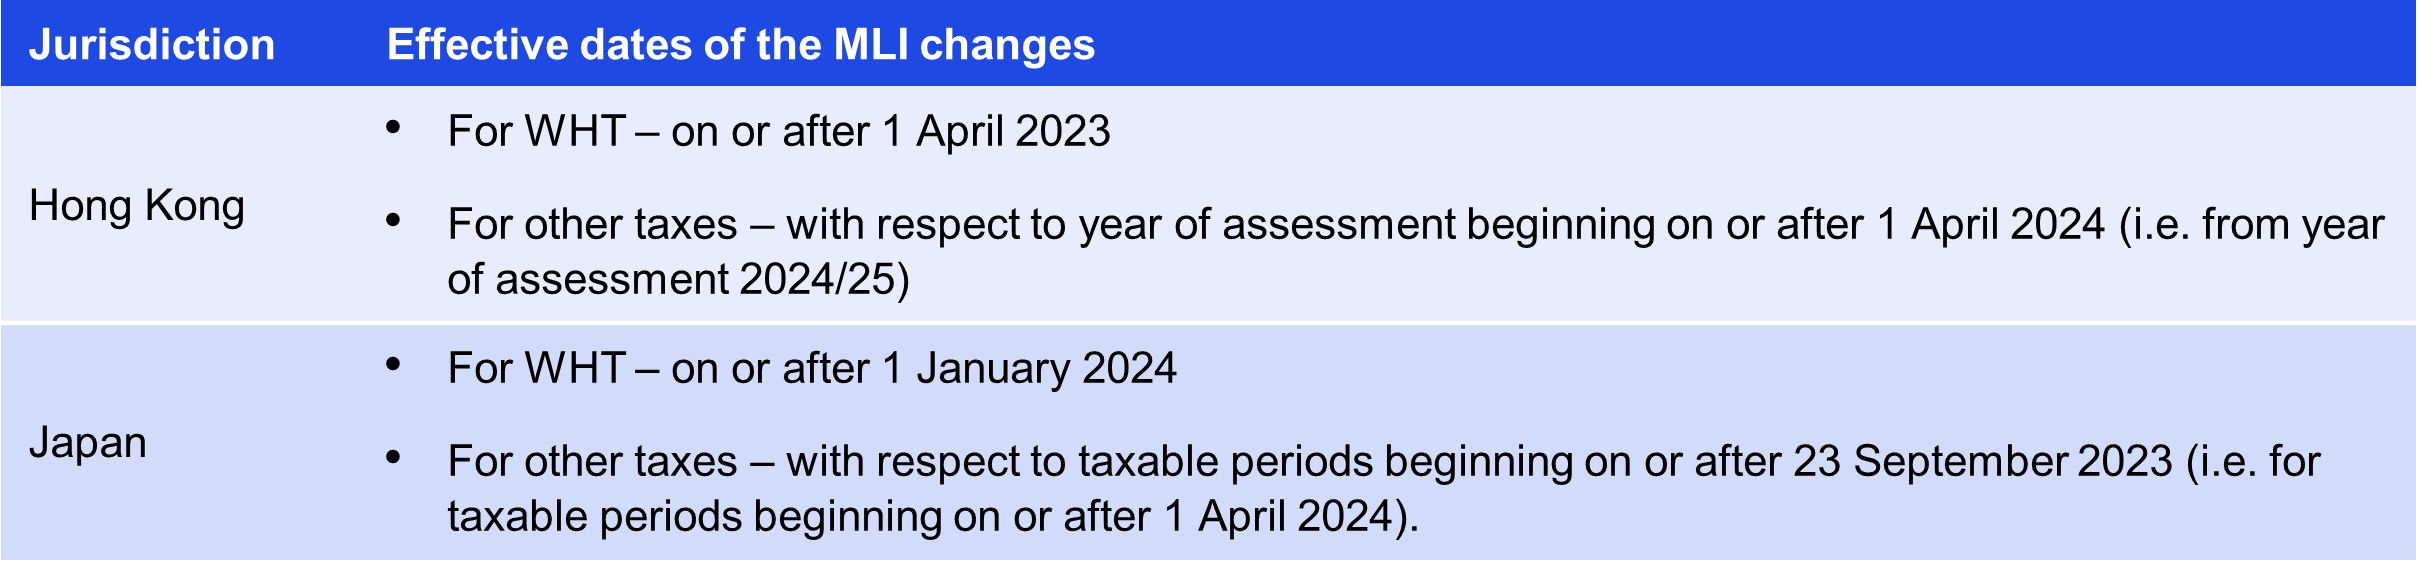 the effective dates of the MLI changes in Japan and Hong Kong